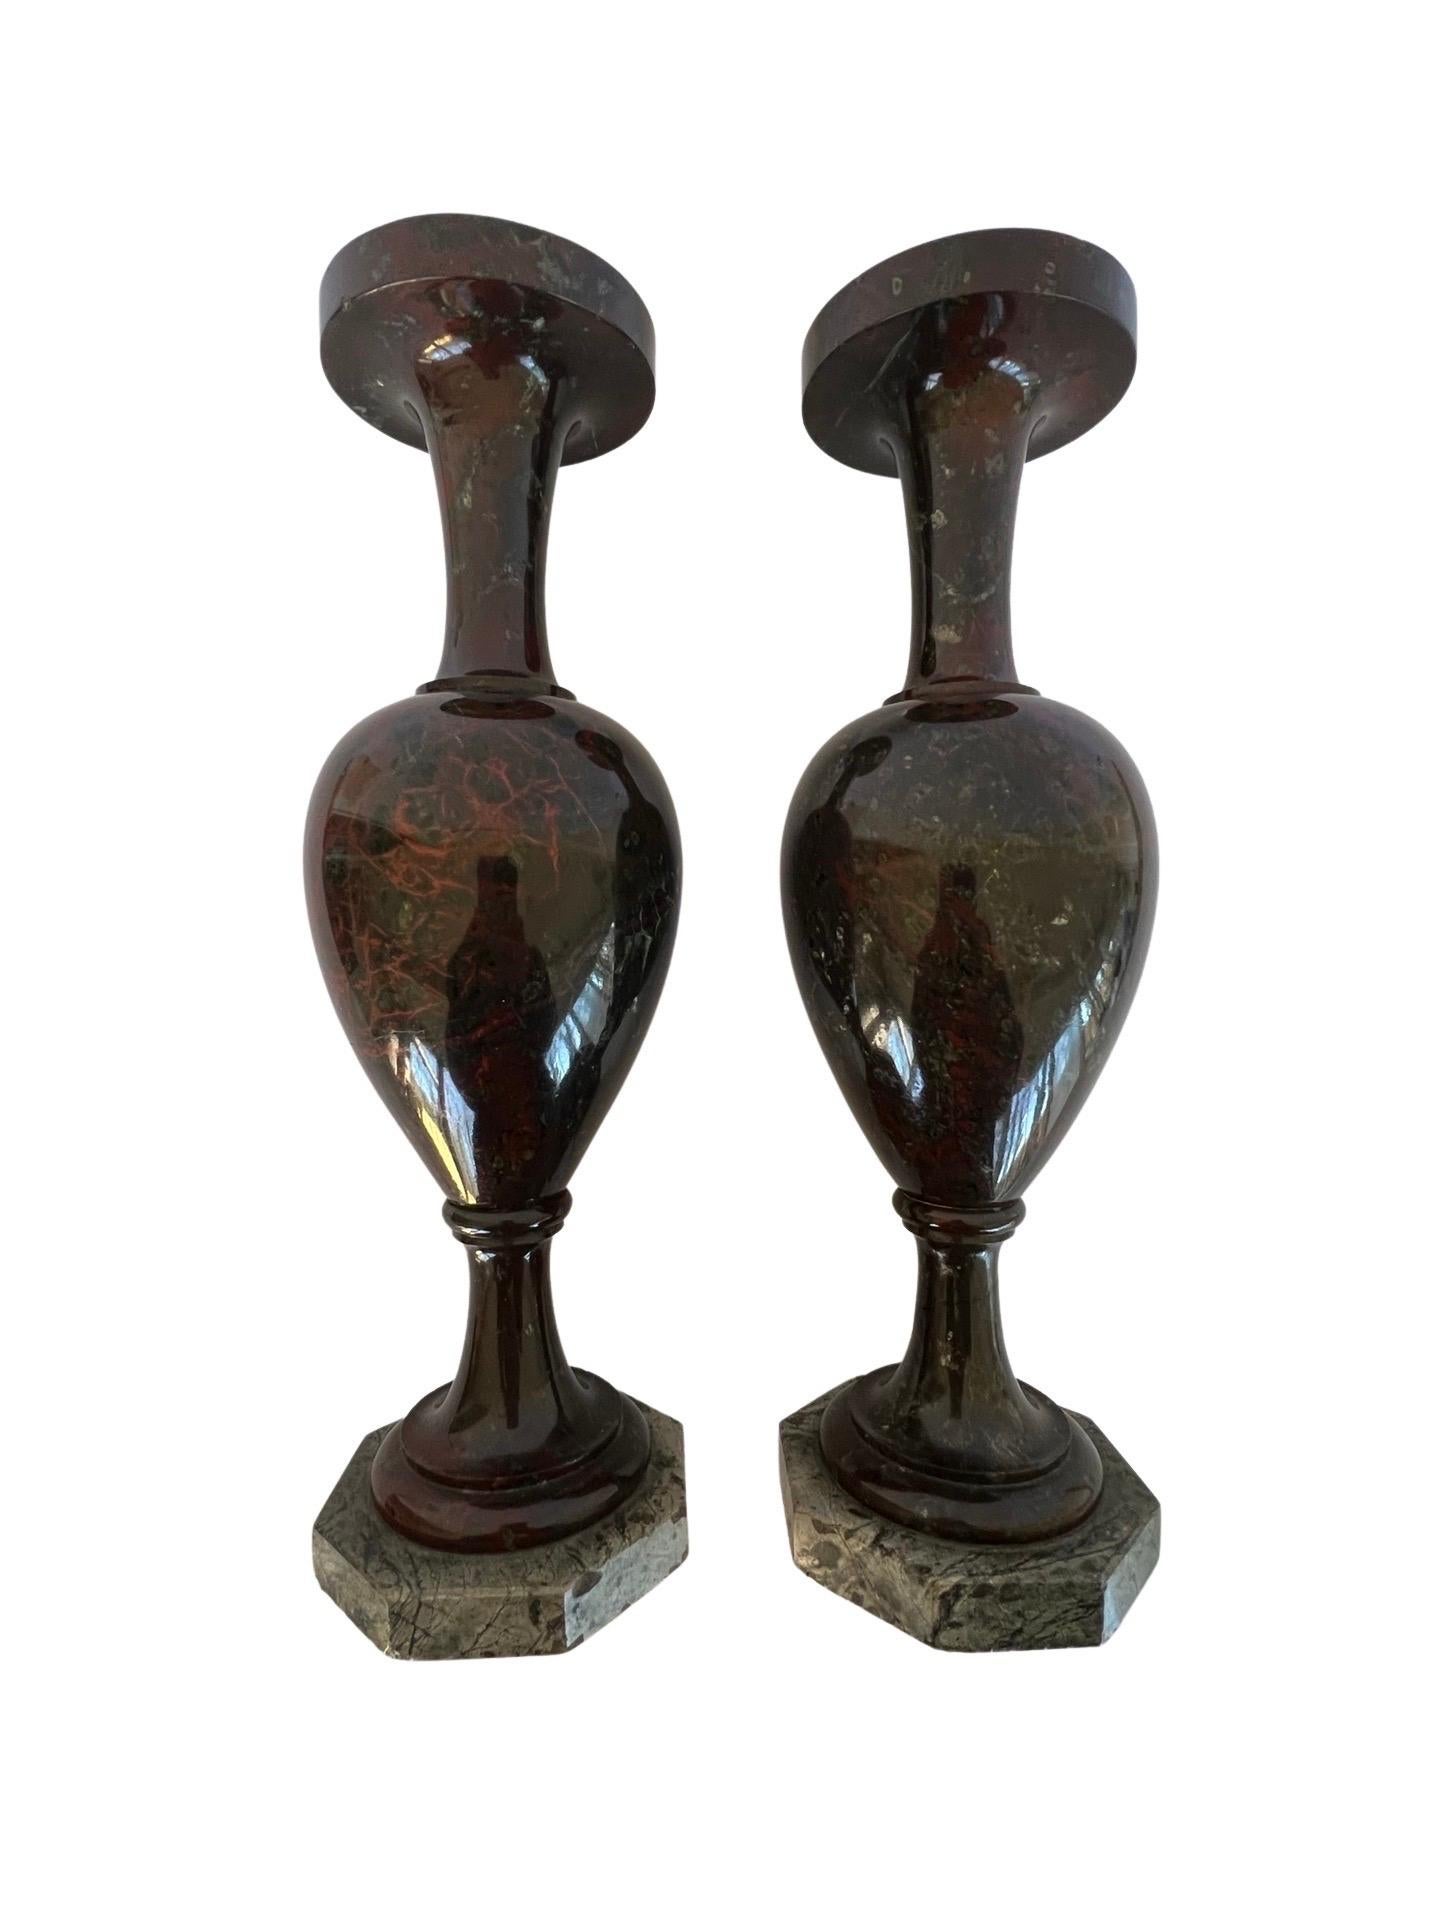 A pair of antique Cornwall vases carved from reddish brown jasper stone and date from the late nineteenth century. Each mounted to a marble base.